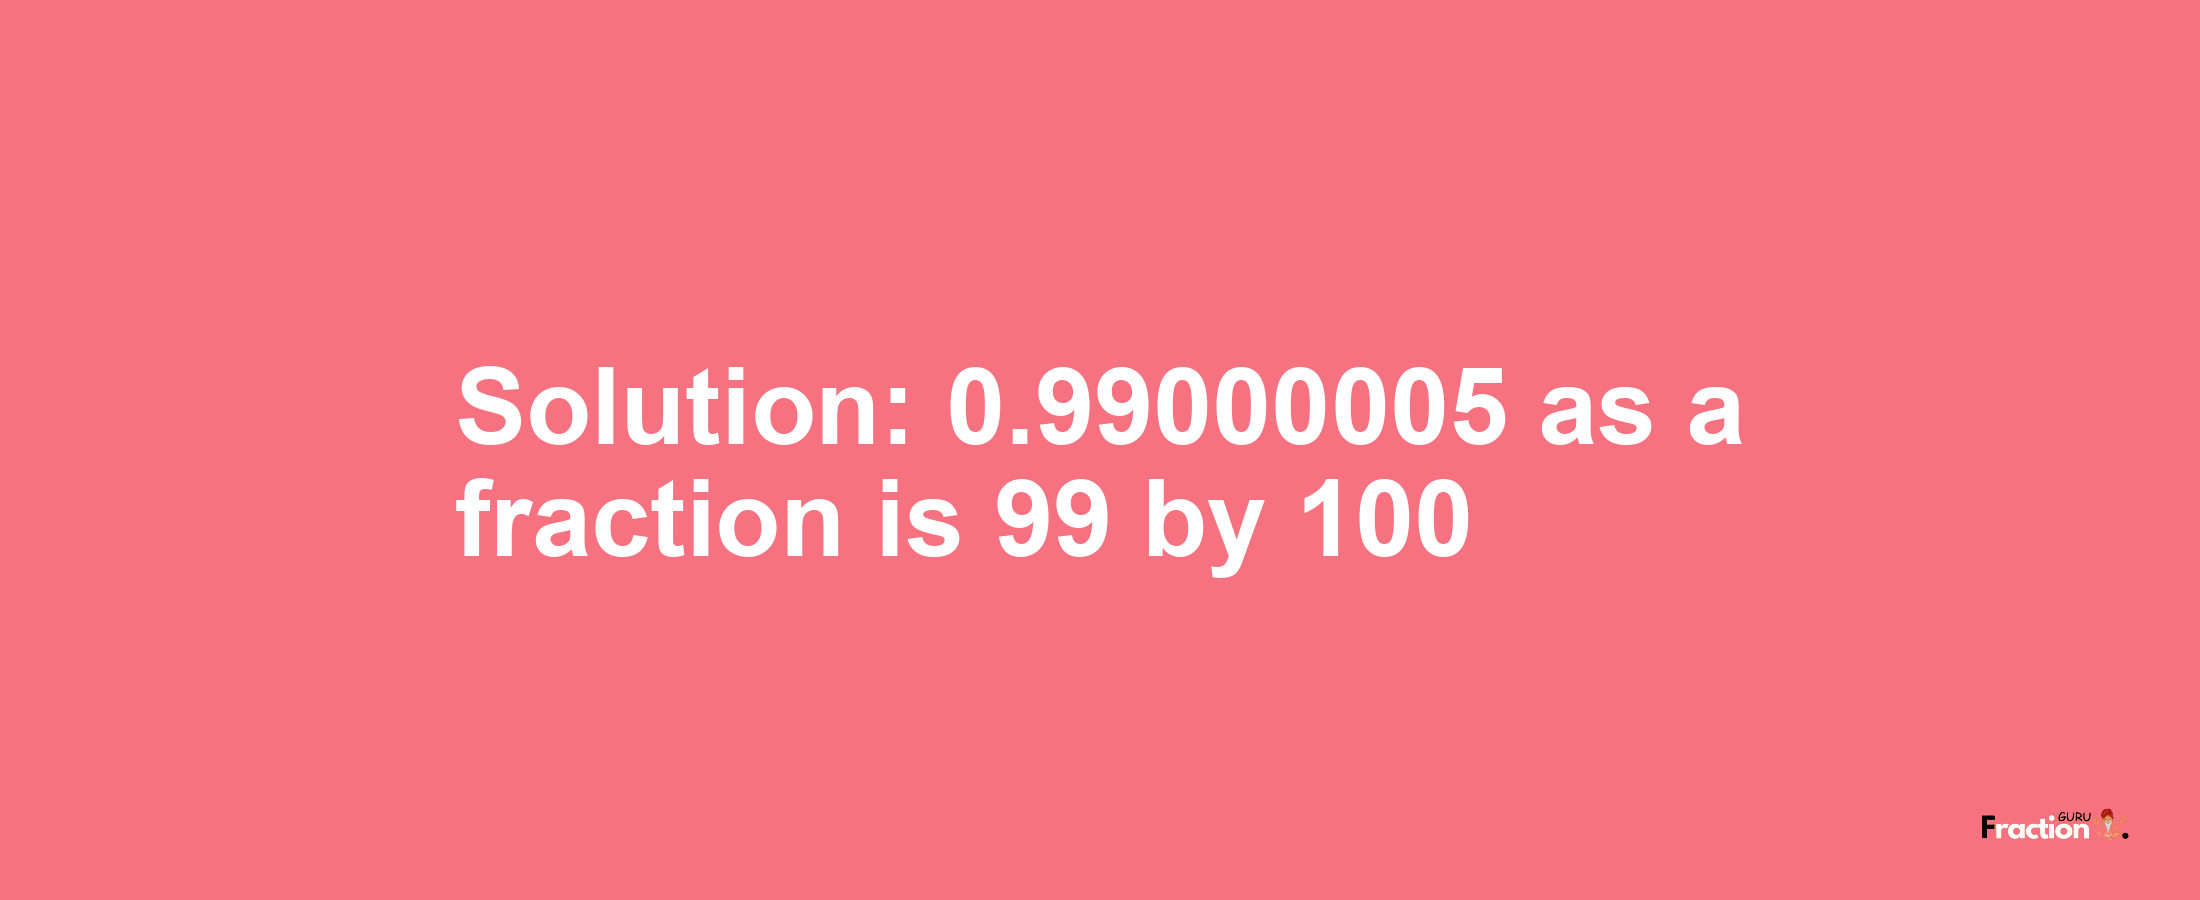 Solution:0.99000005 as a fraction is 99/100